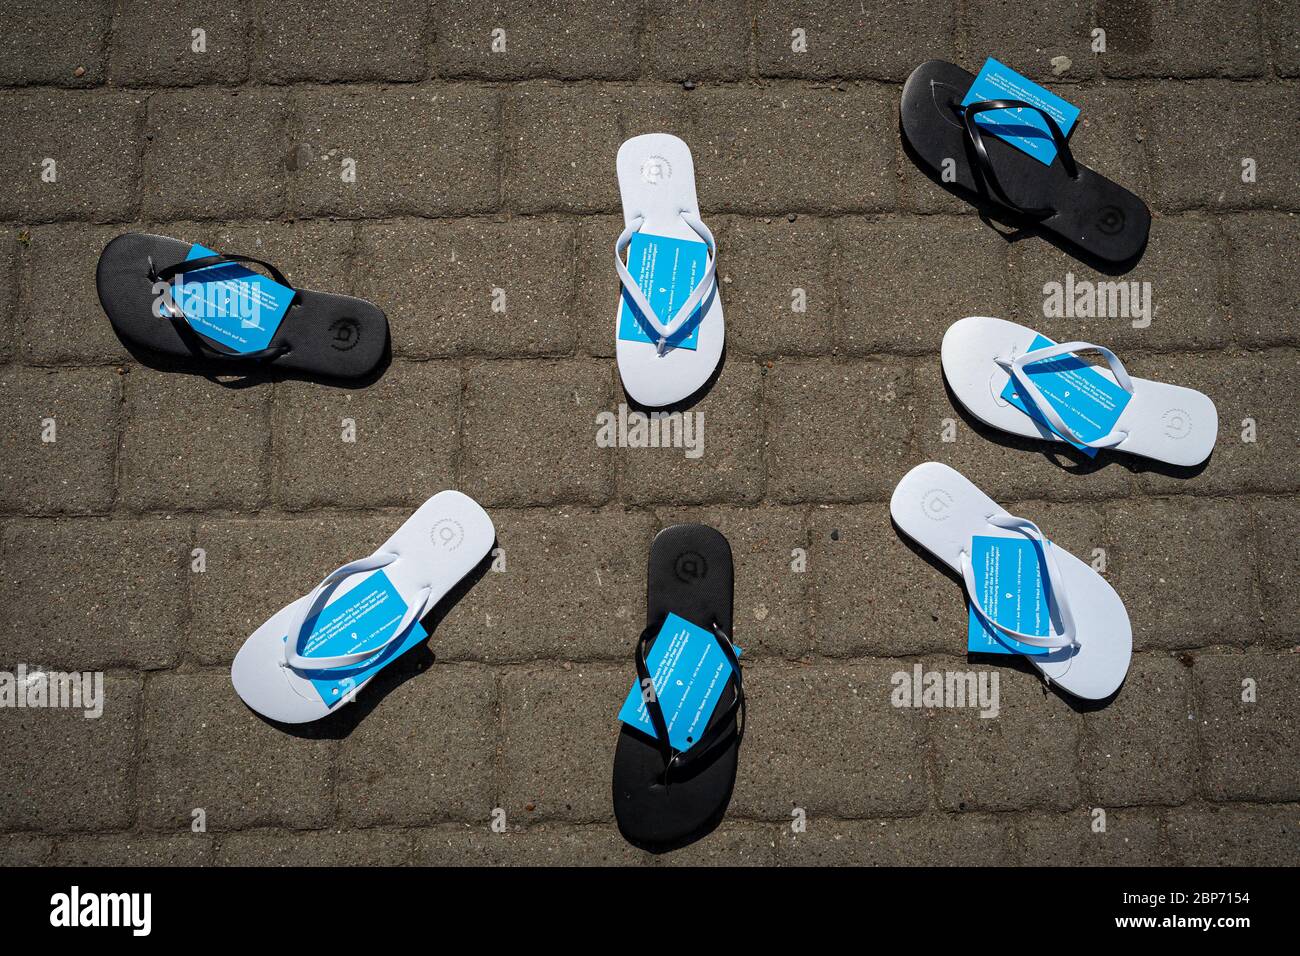 WARNEMUENDE (ROSTOCK), GERMANY - JULY 25, 2019: Flip flops lie on the pavement in a semicircle. Unusual advertising campaign shoe store. Stock Photo